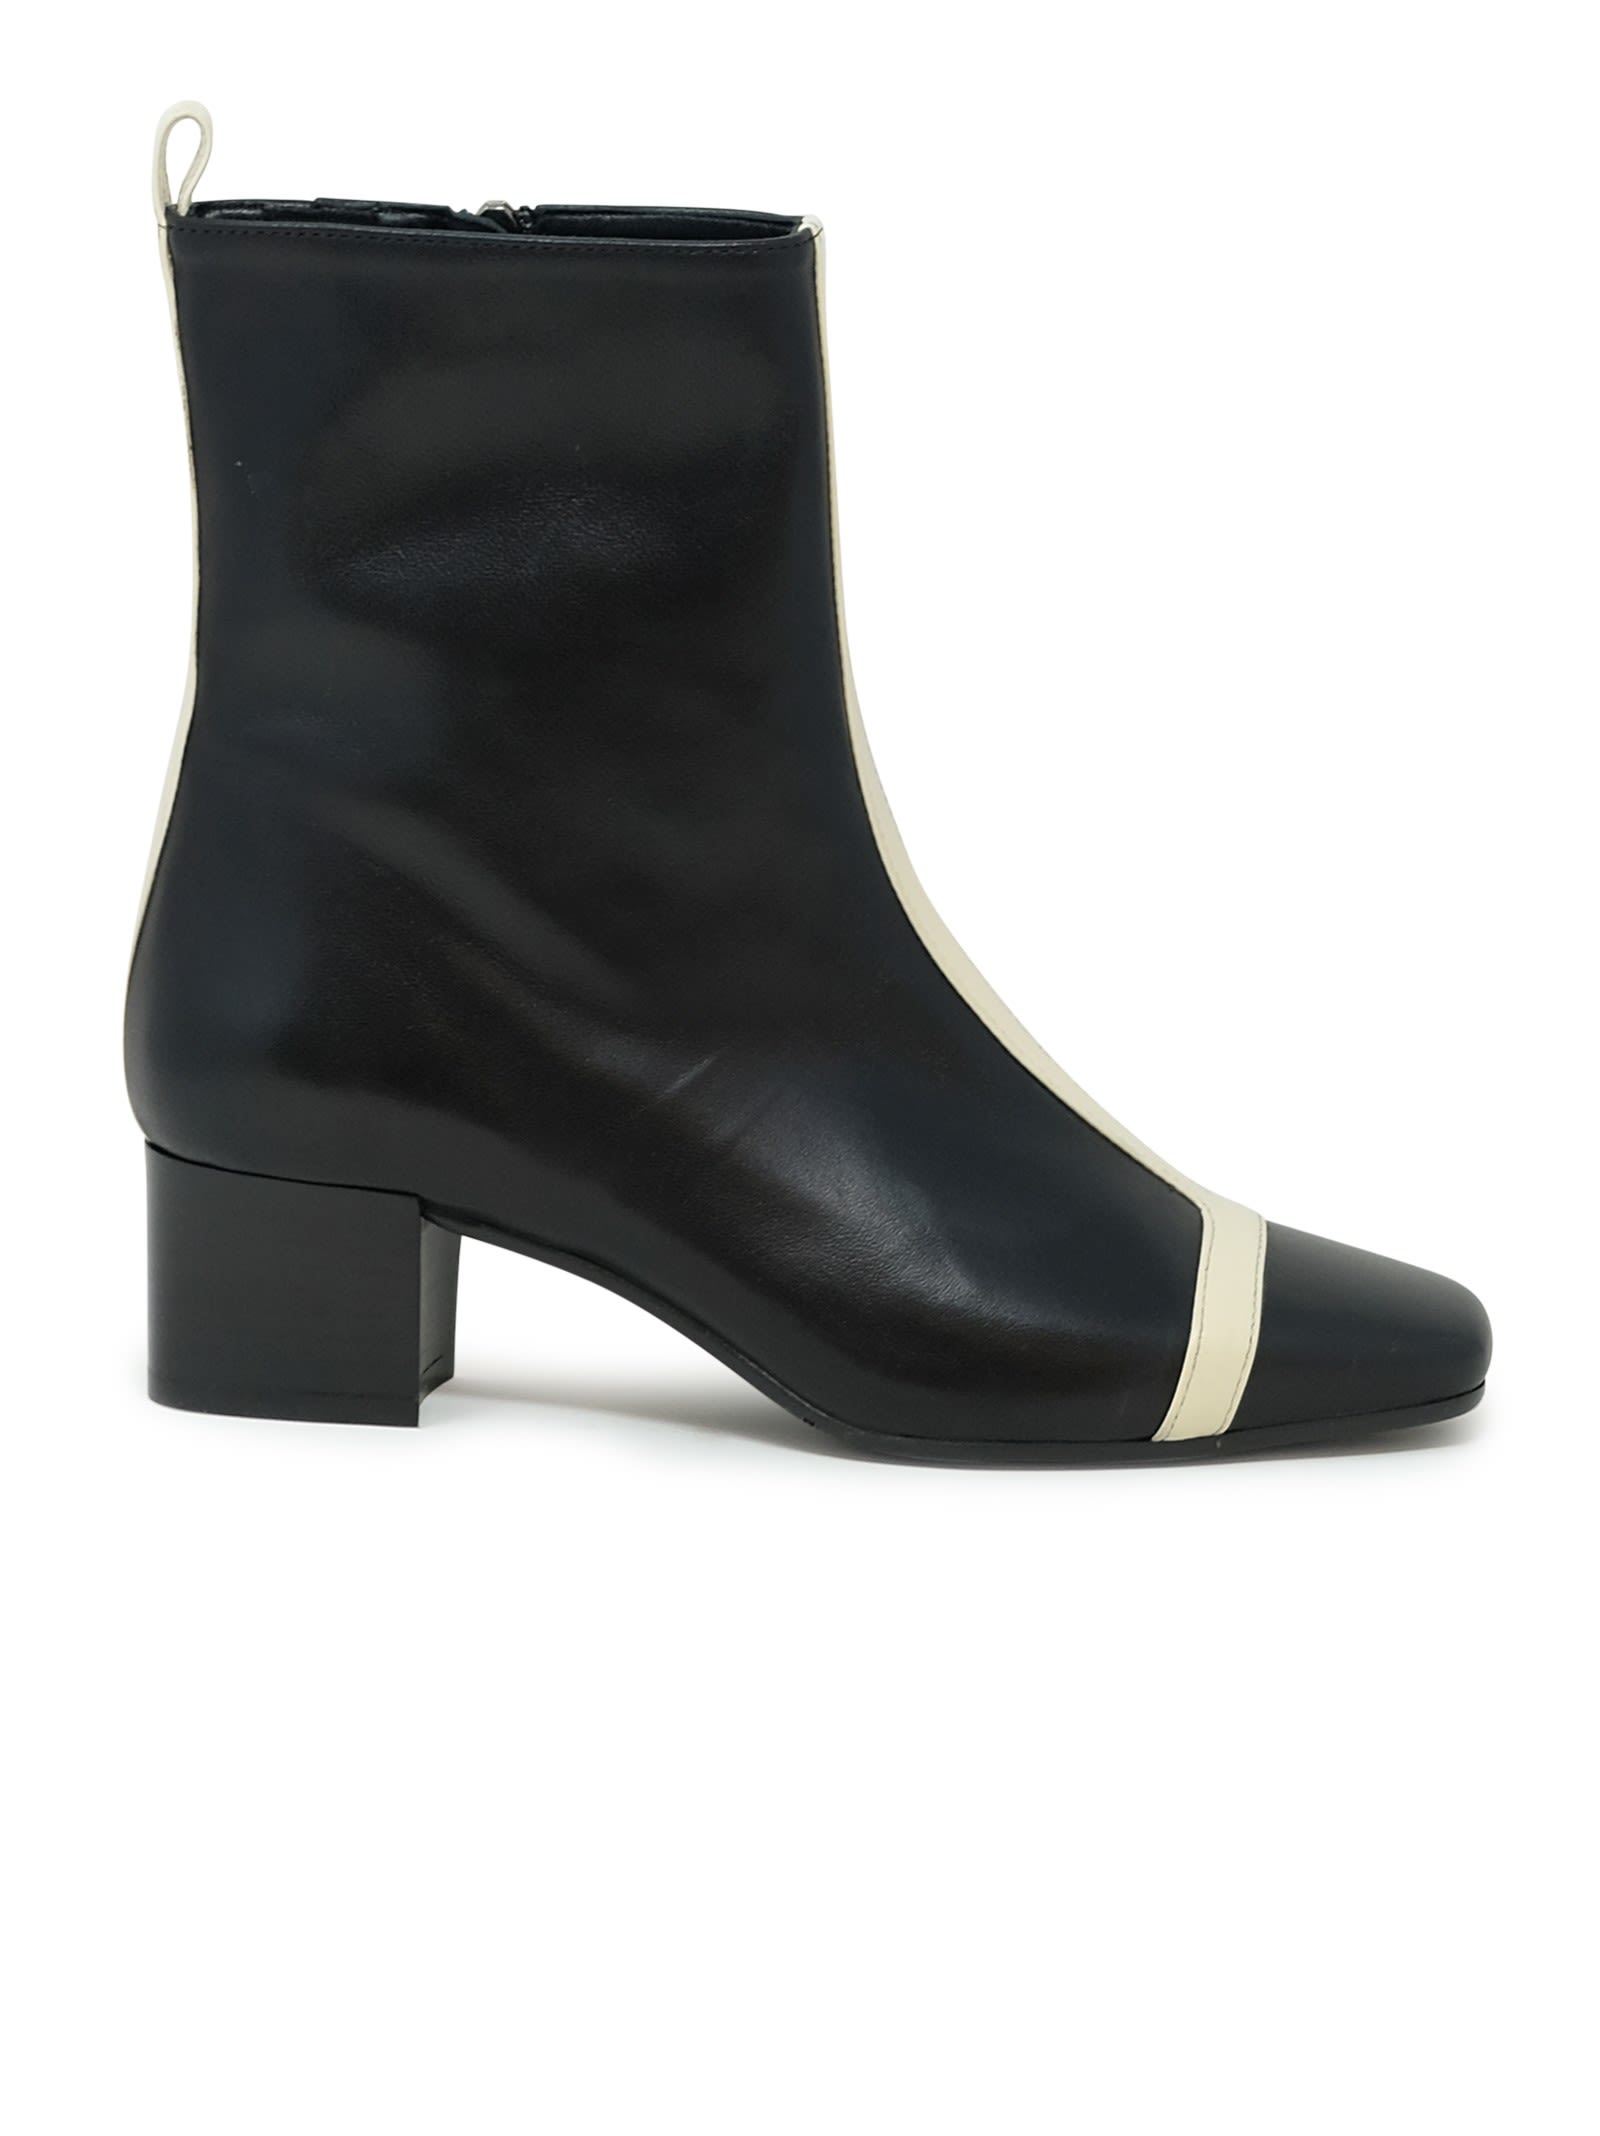 Carel Paris Black And White Leather Boot In Black/white